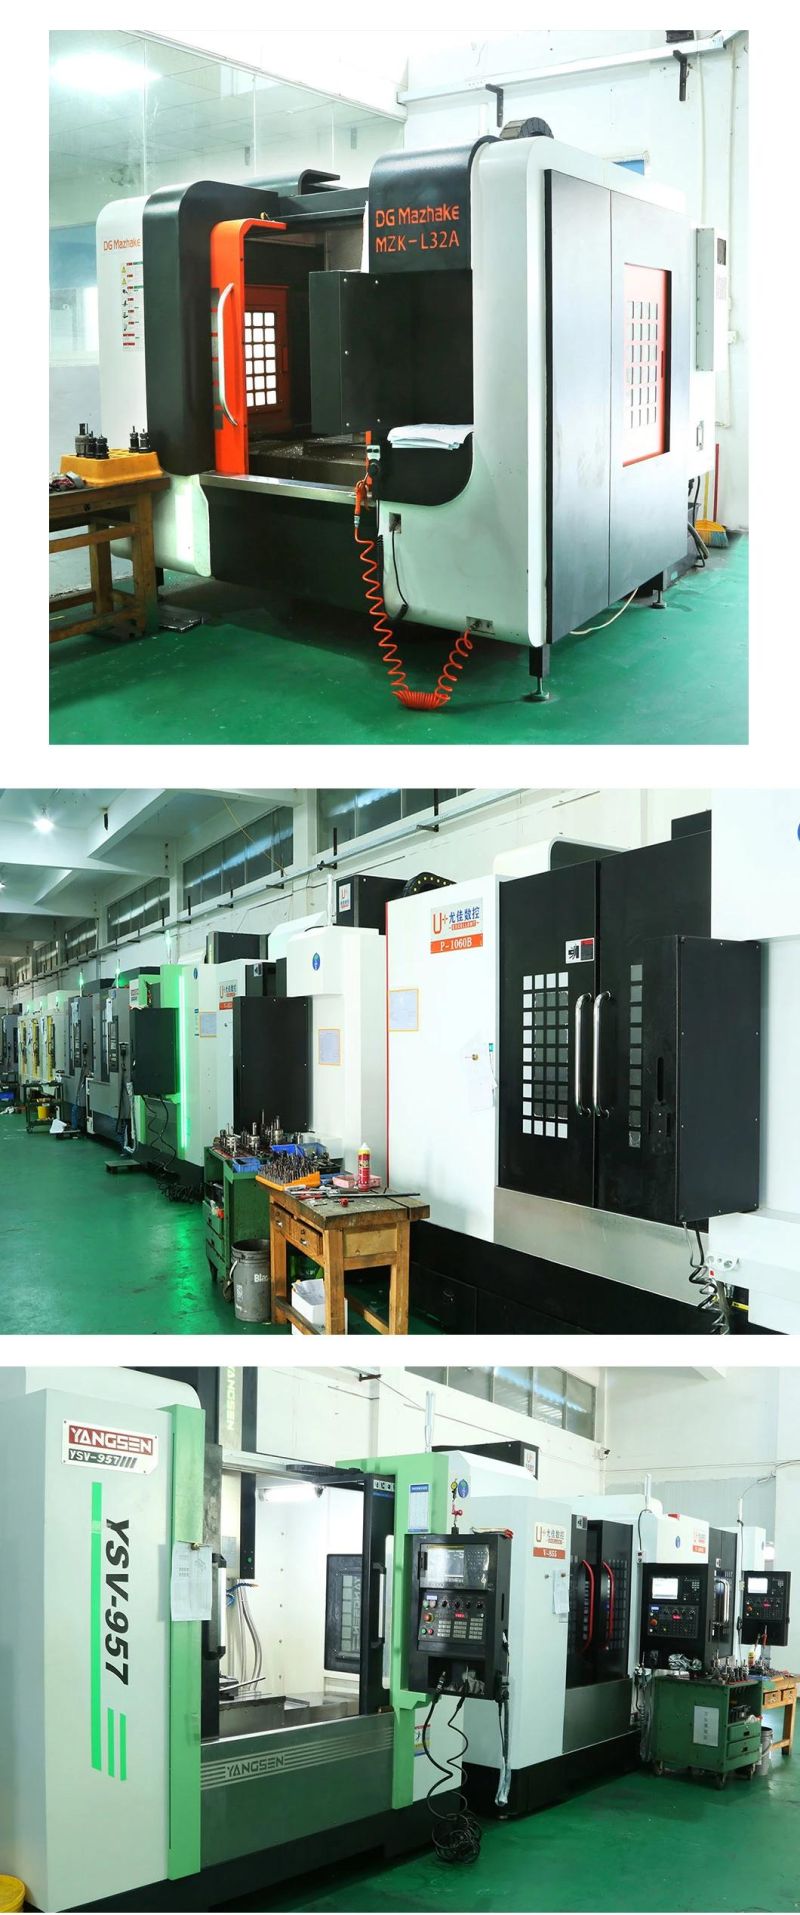 OEM Plastic Injection Home Appliance Tower Fan Mould in China Factory Hot Sales Product